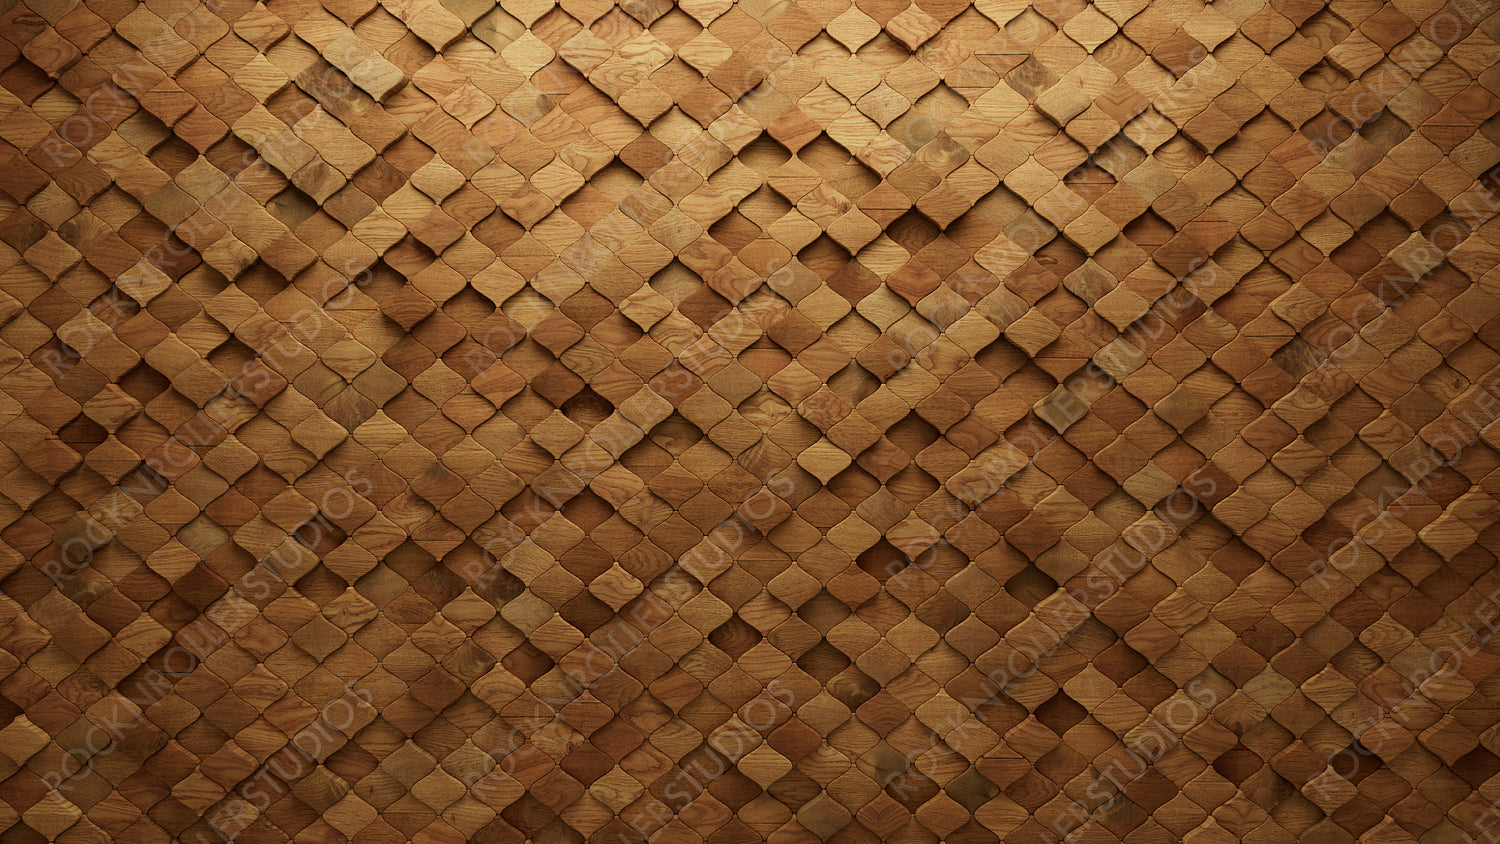 Natural, Arabesque Wall background with tiles. Timber, tile Wallpaper with Wood, 3D blocks. 3D Render